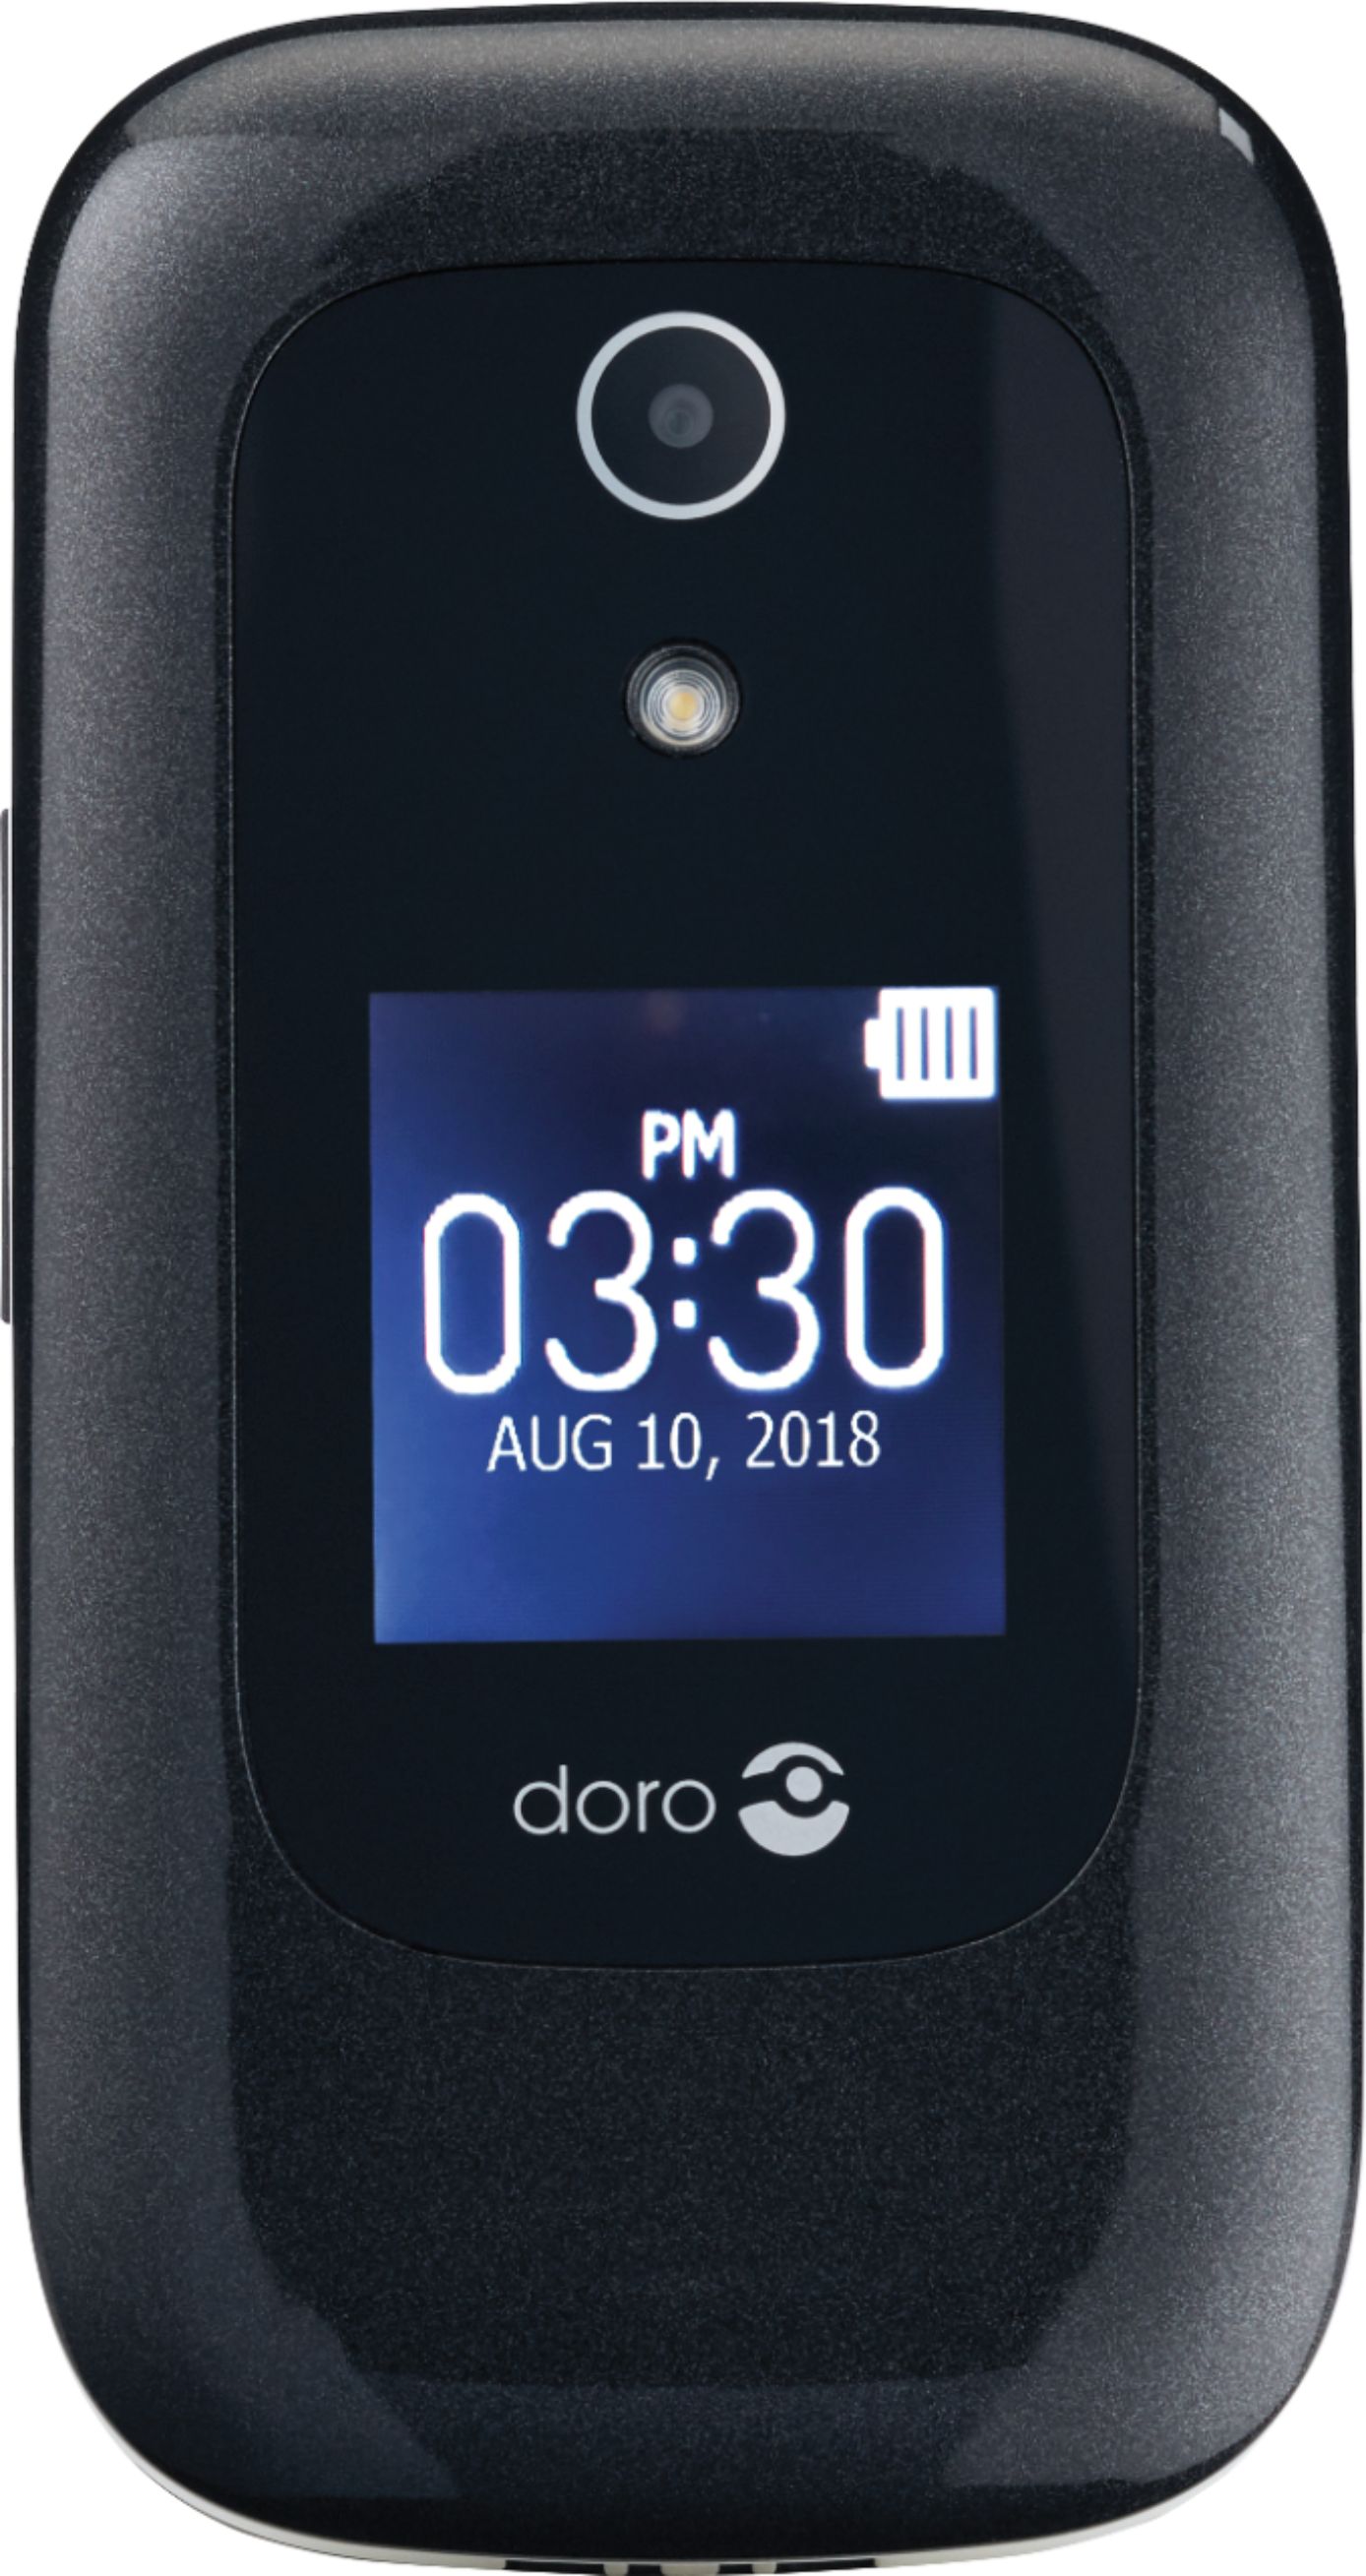 Doro 7050TL Flip Easy-to-Use Cell Phone for Seniors by Tracfone White/Black  Multi color 